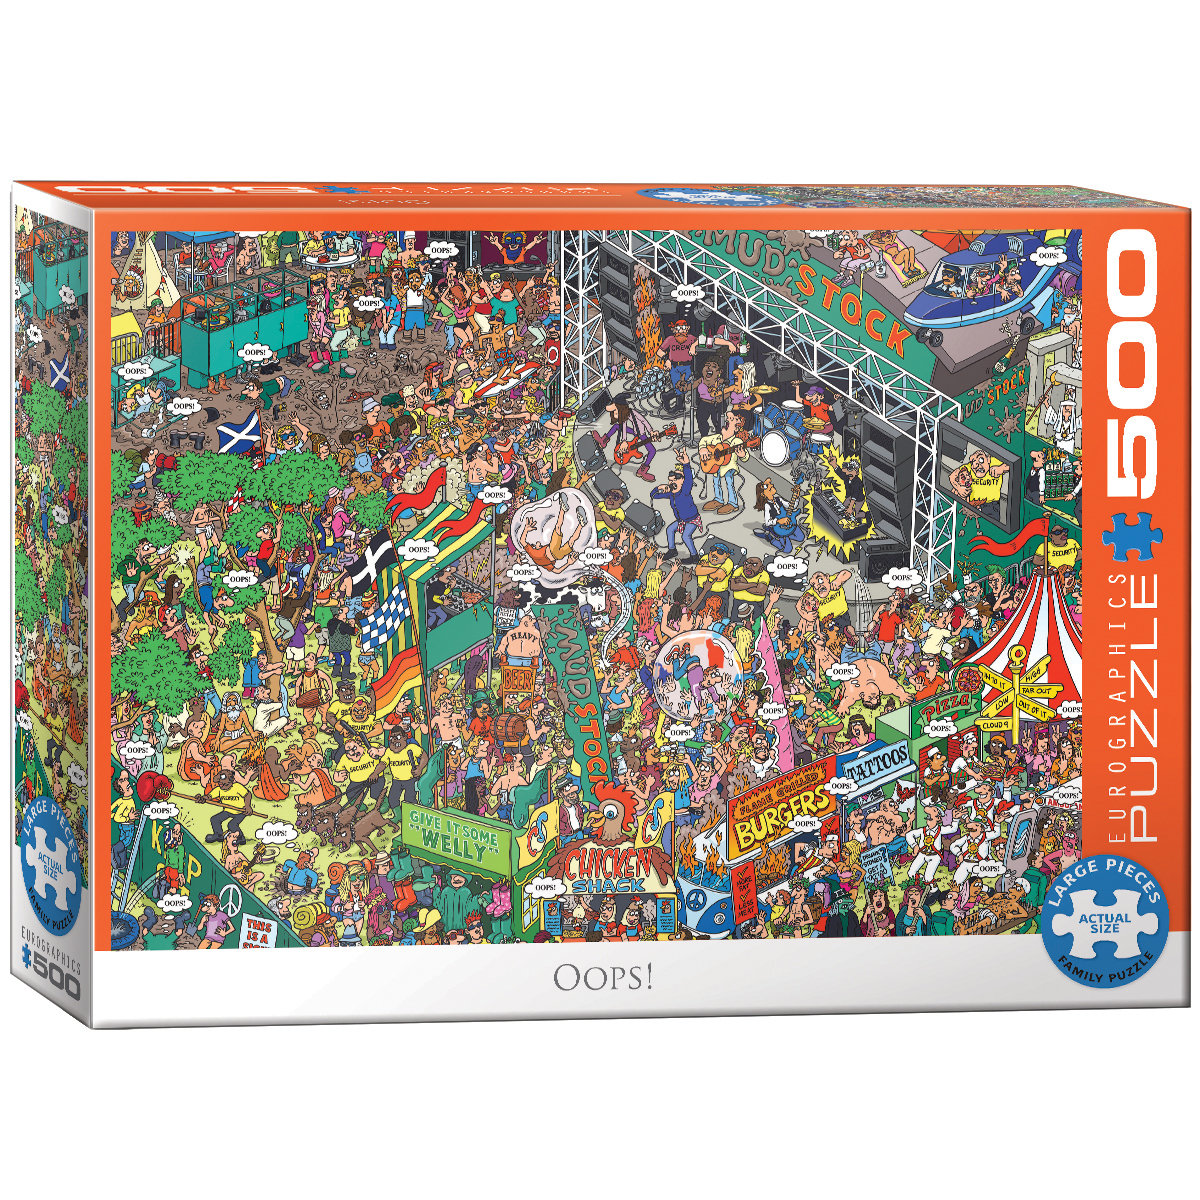 Eurographics Puzzle 500 Oops! by Martin Berry 6500-5459 -